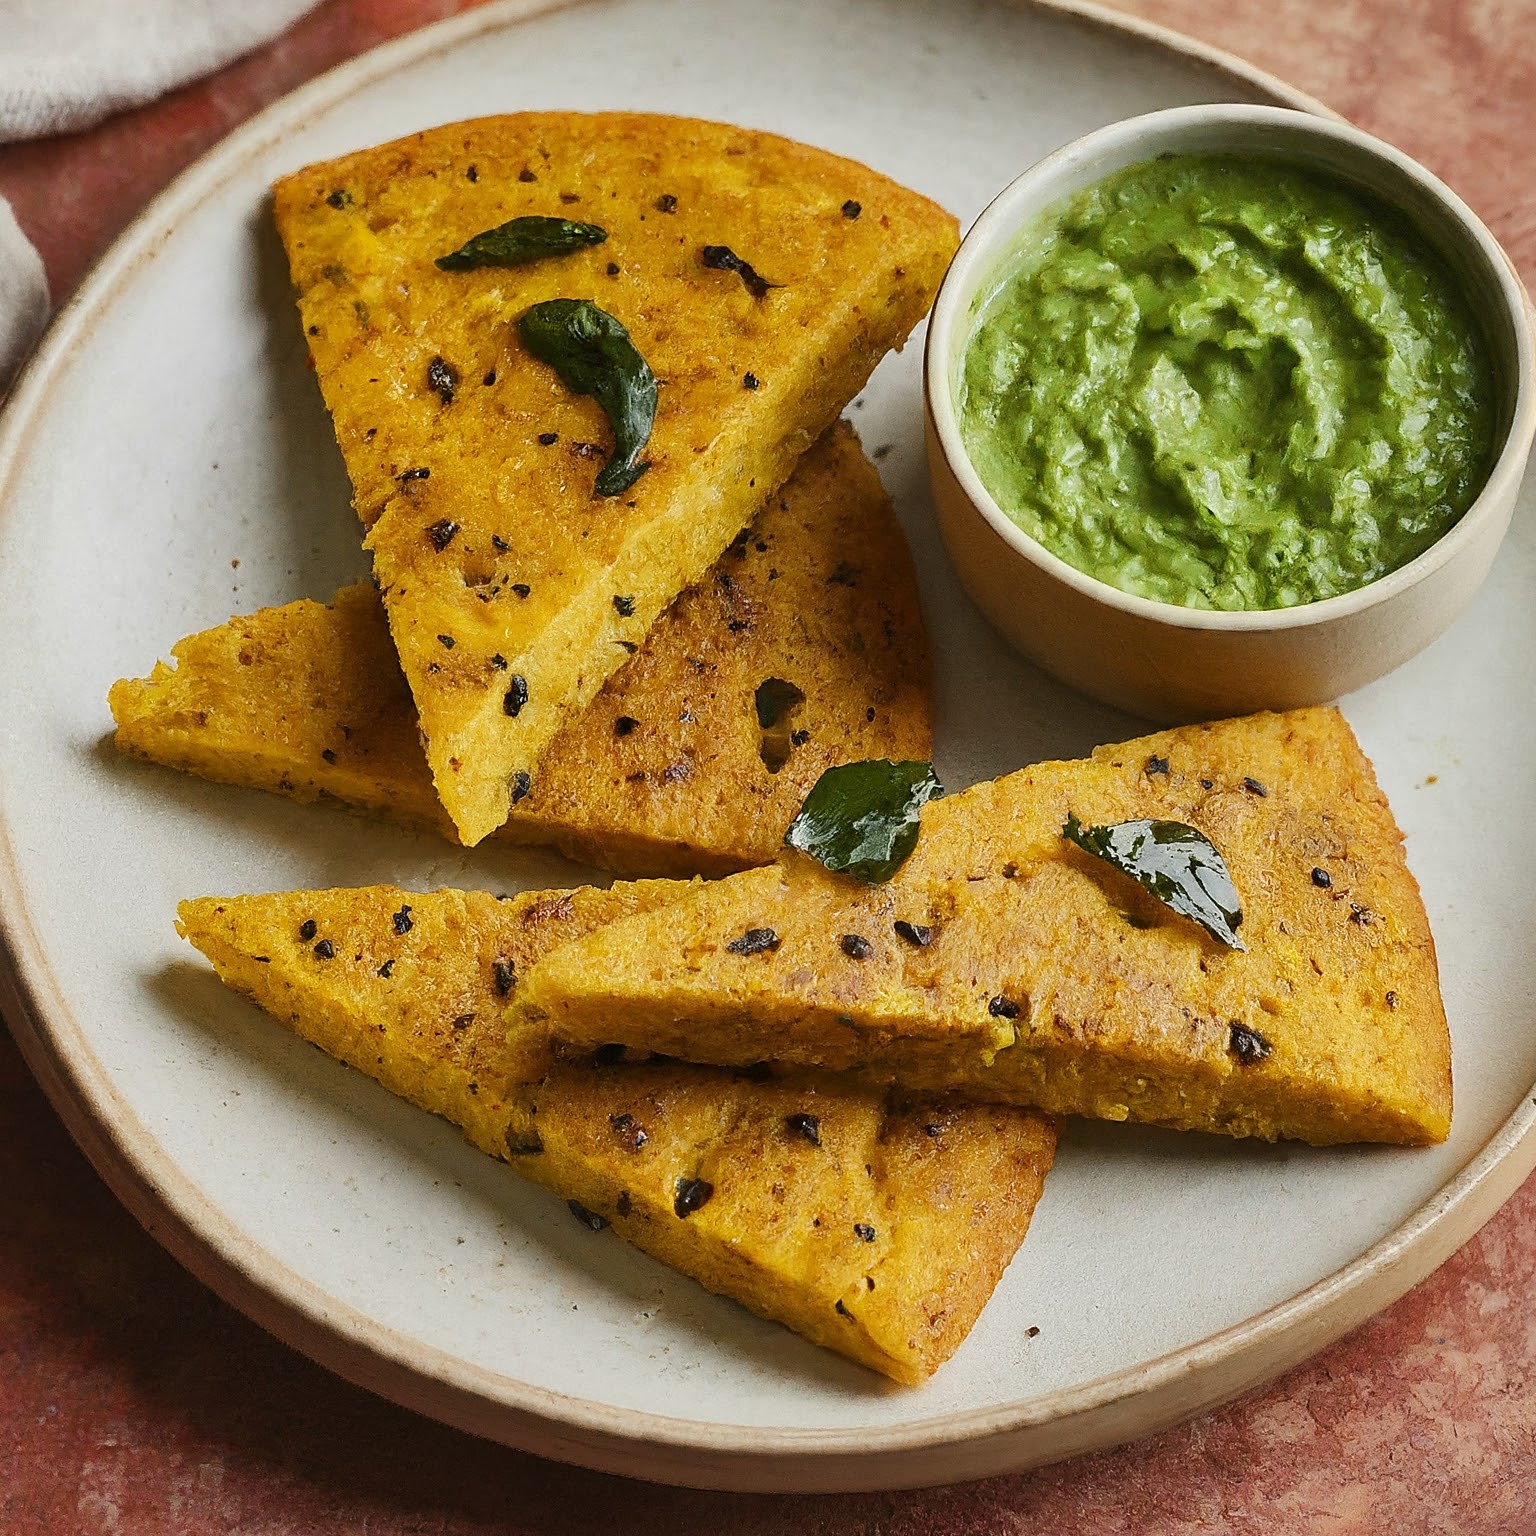 A golden brown Handvo lentil cake cut into wedges on a plate with green chutney.